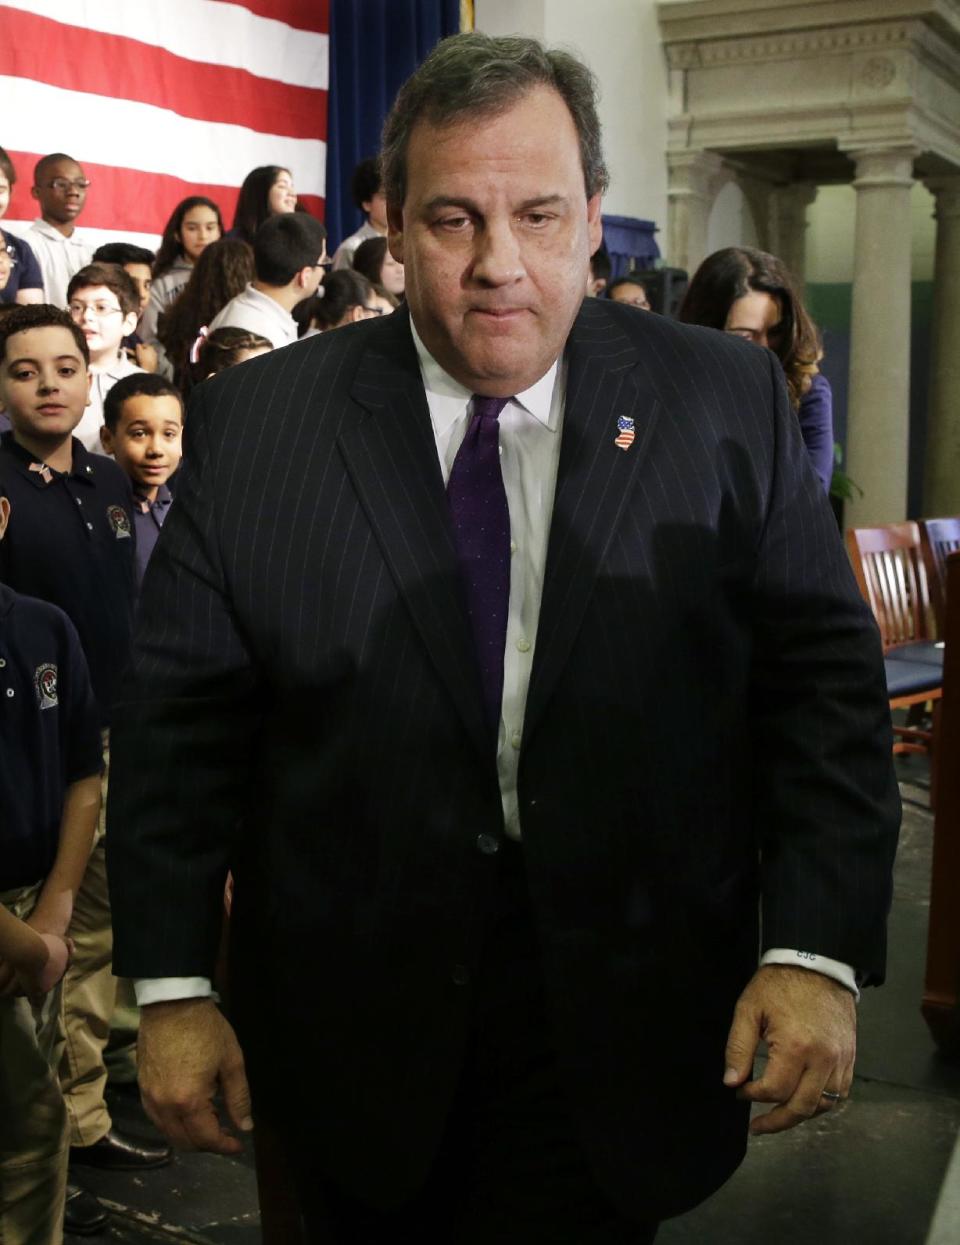 New Jersey Gov. Chris Christie walks from a gathering with school children in Union City, N.J., Tuesday, Jan. 7, 2014. A top aide to Christie is linked through emails and text messages to a seemingly deliberate plan to create traffic gridlock in Fort Lee, N.J., at the base of the George Washington Bridge after its mayor refused to endorse Christie for re-election. (AP Photo/Mel Evans)